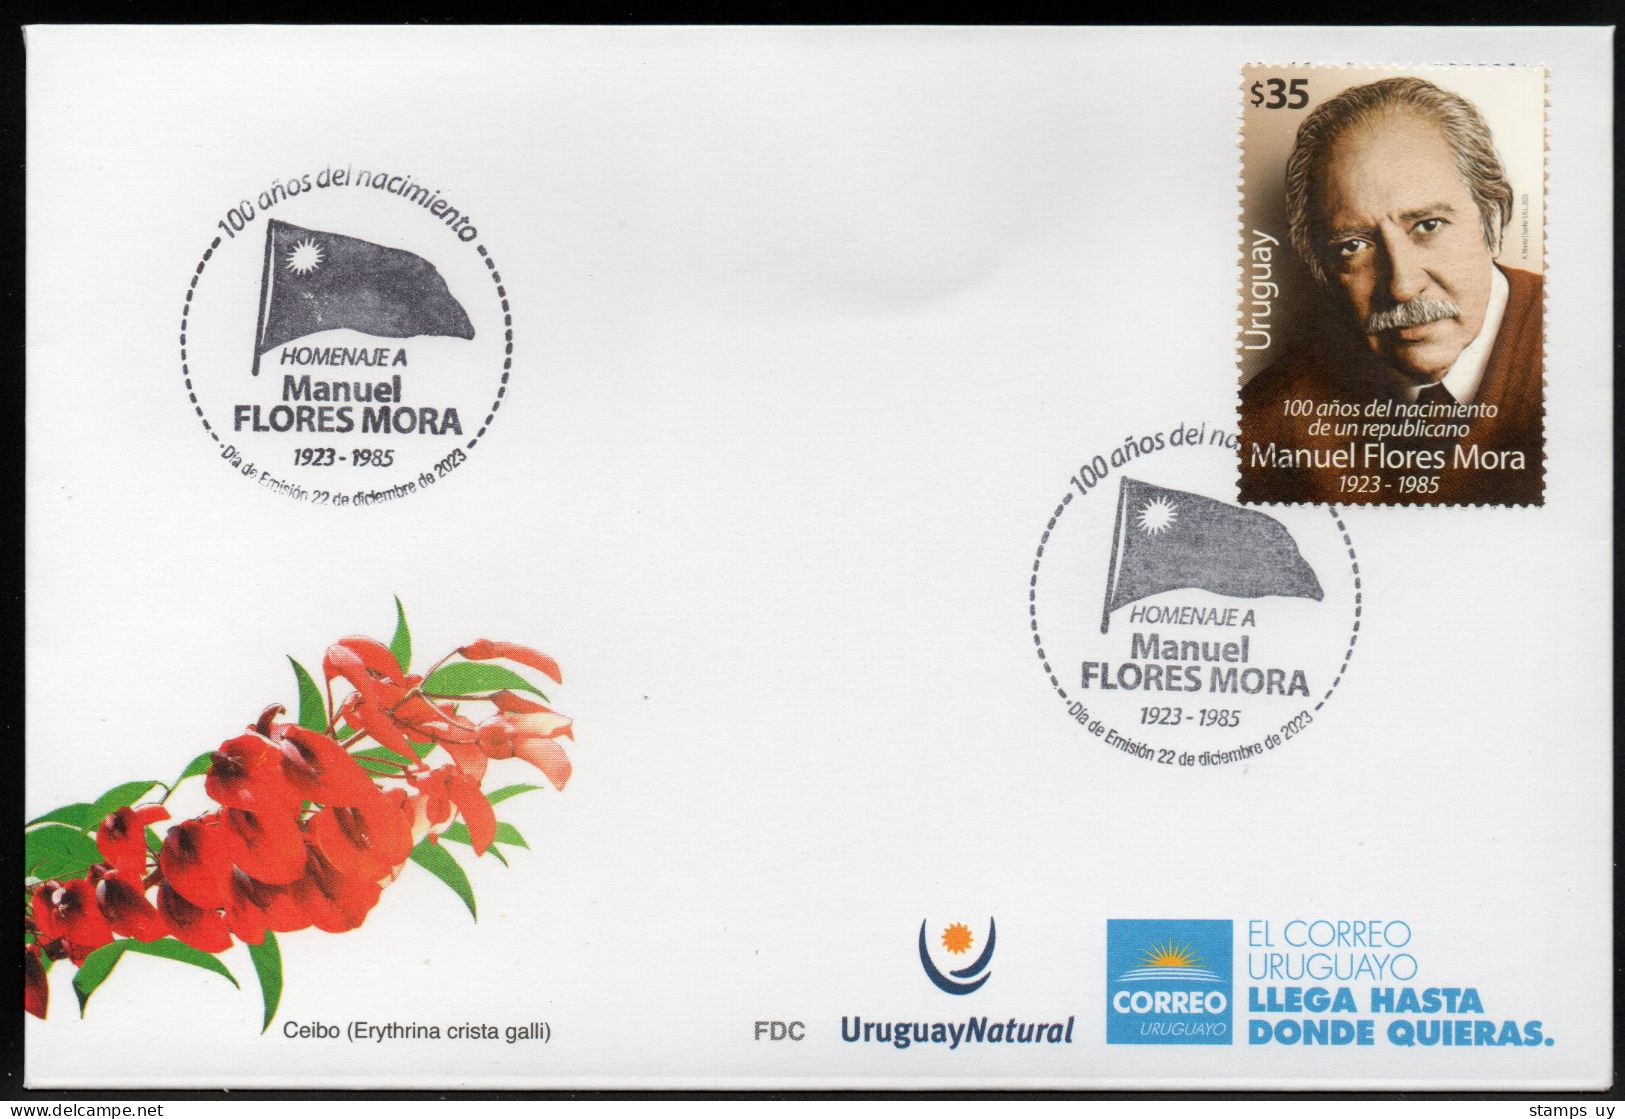 URUGUAY 2023 (Politicians, Periodist, Manuel Flores Mora, Red Party, Right-wing, Flags, Star) - 1 FDC - Uruguay